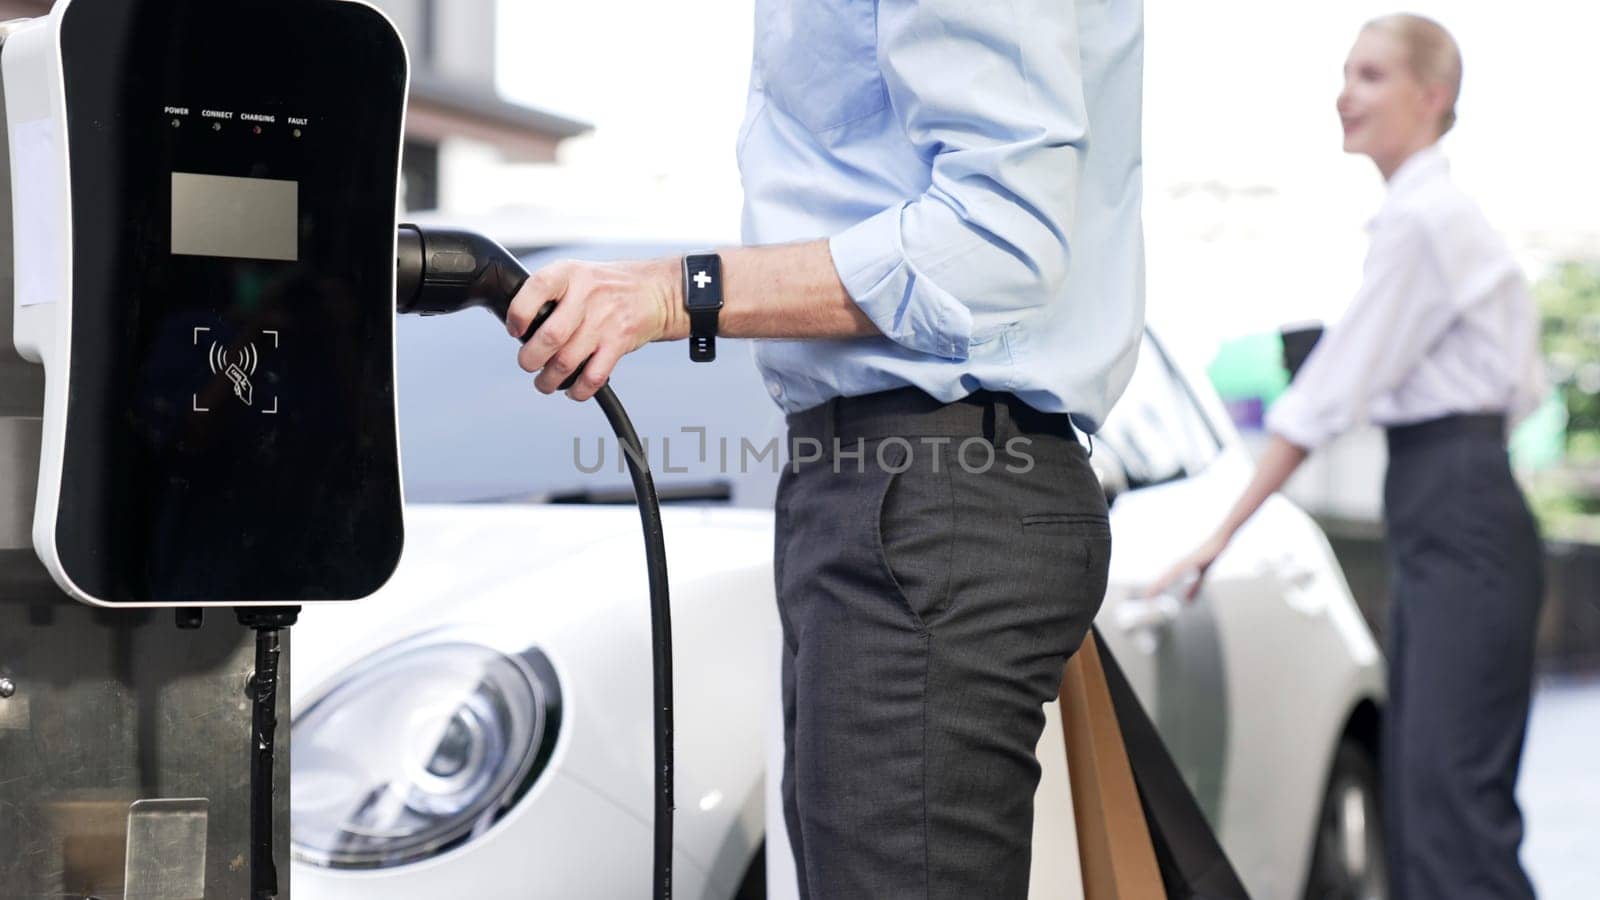 Businessman and businesswoman with progressive ambition unplug power cable from electric vehicle, standing on charging station with power cable plug and renewable energy-powered electric vehicle.